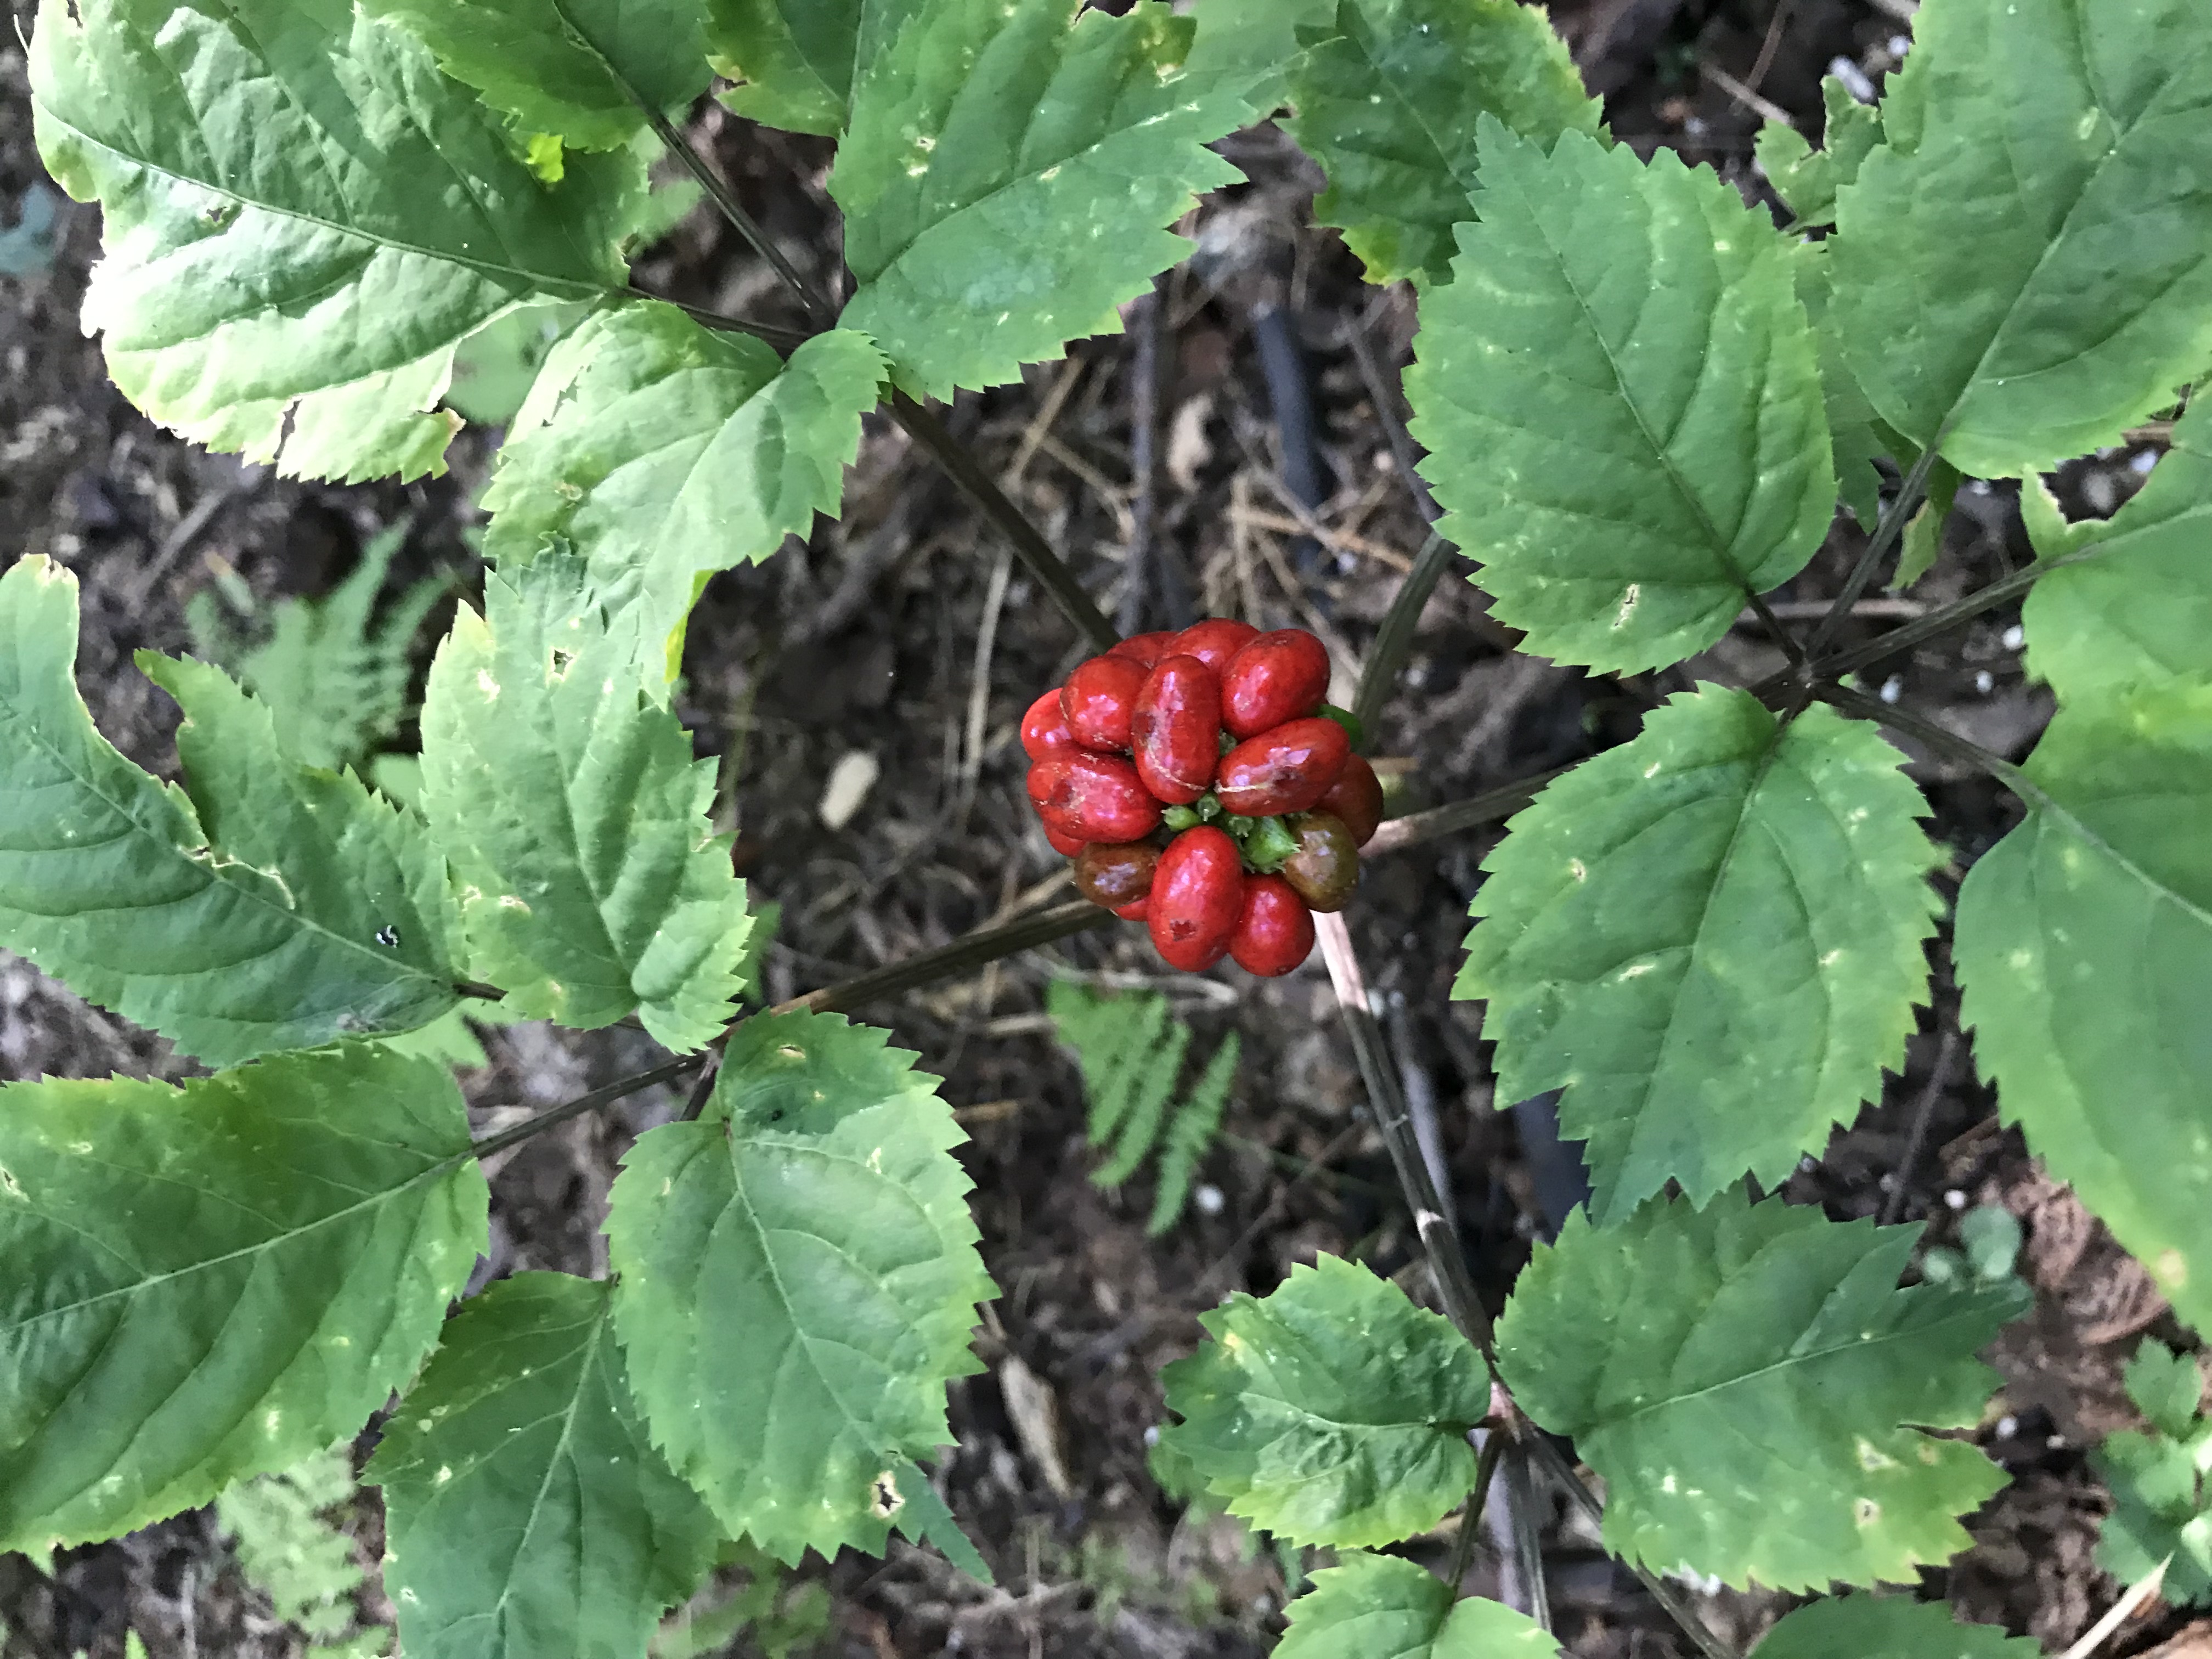 Ginseng plant with red berries